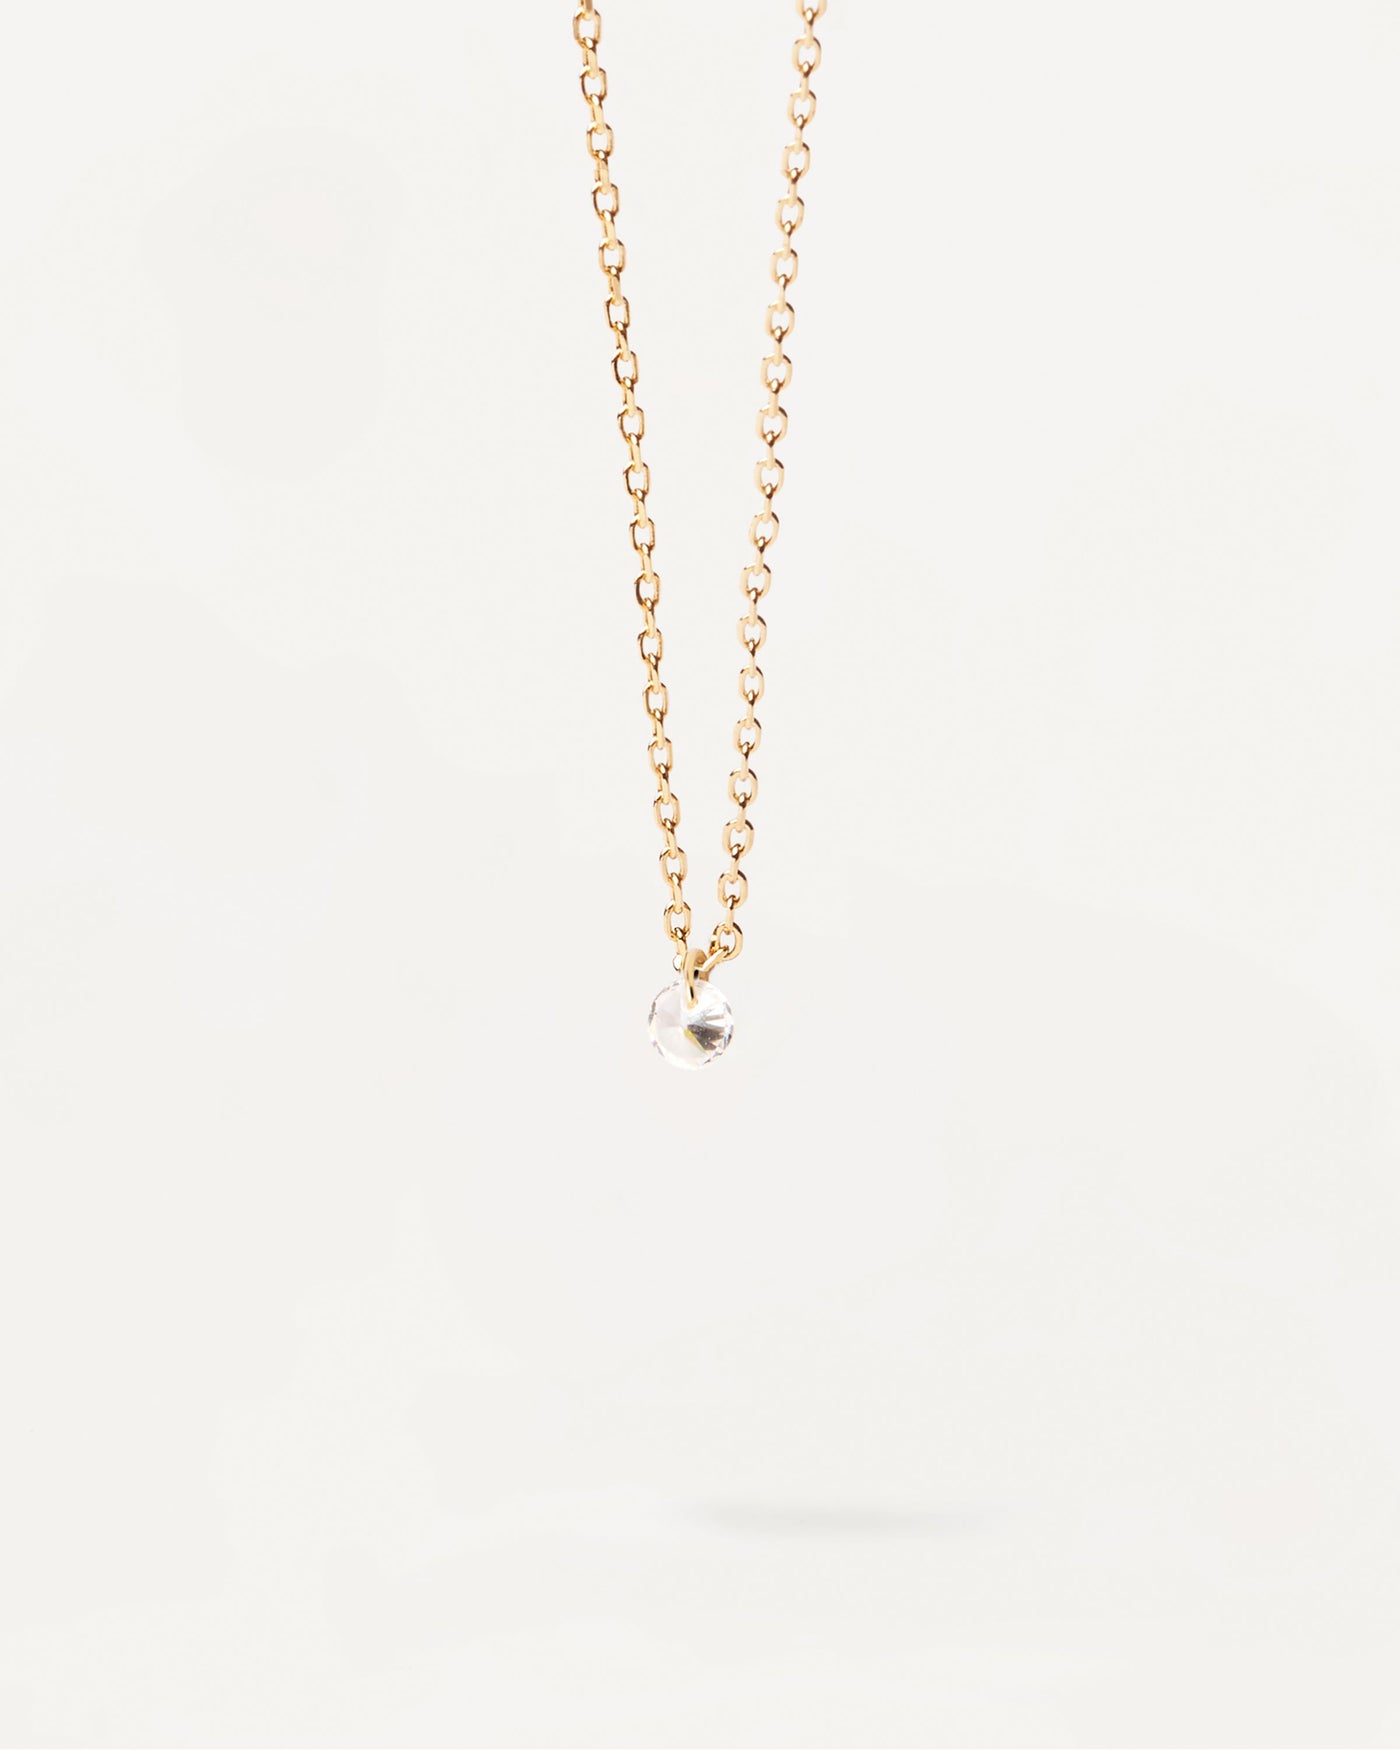 2023 Selection | Joy solitary Necklace. Gold-plated silver minimal necklace with round zirconia pendant. Get the latest arrival from PDPAOLA. Place your order safely and get this Best Seller. Free Shipping.